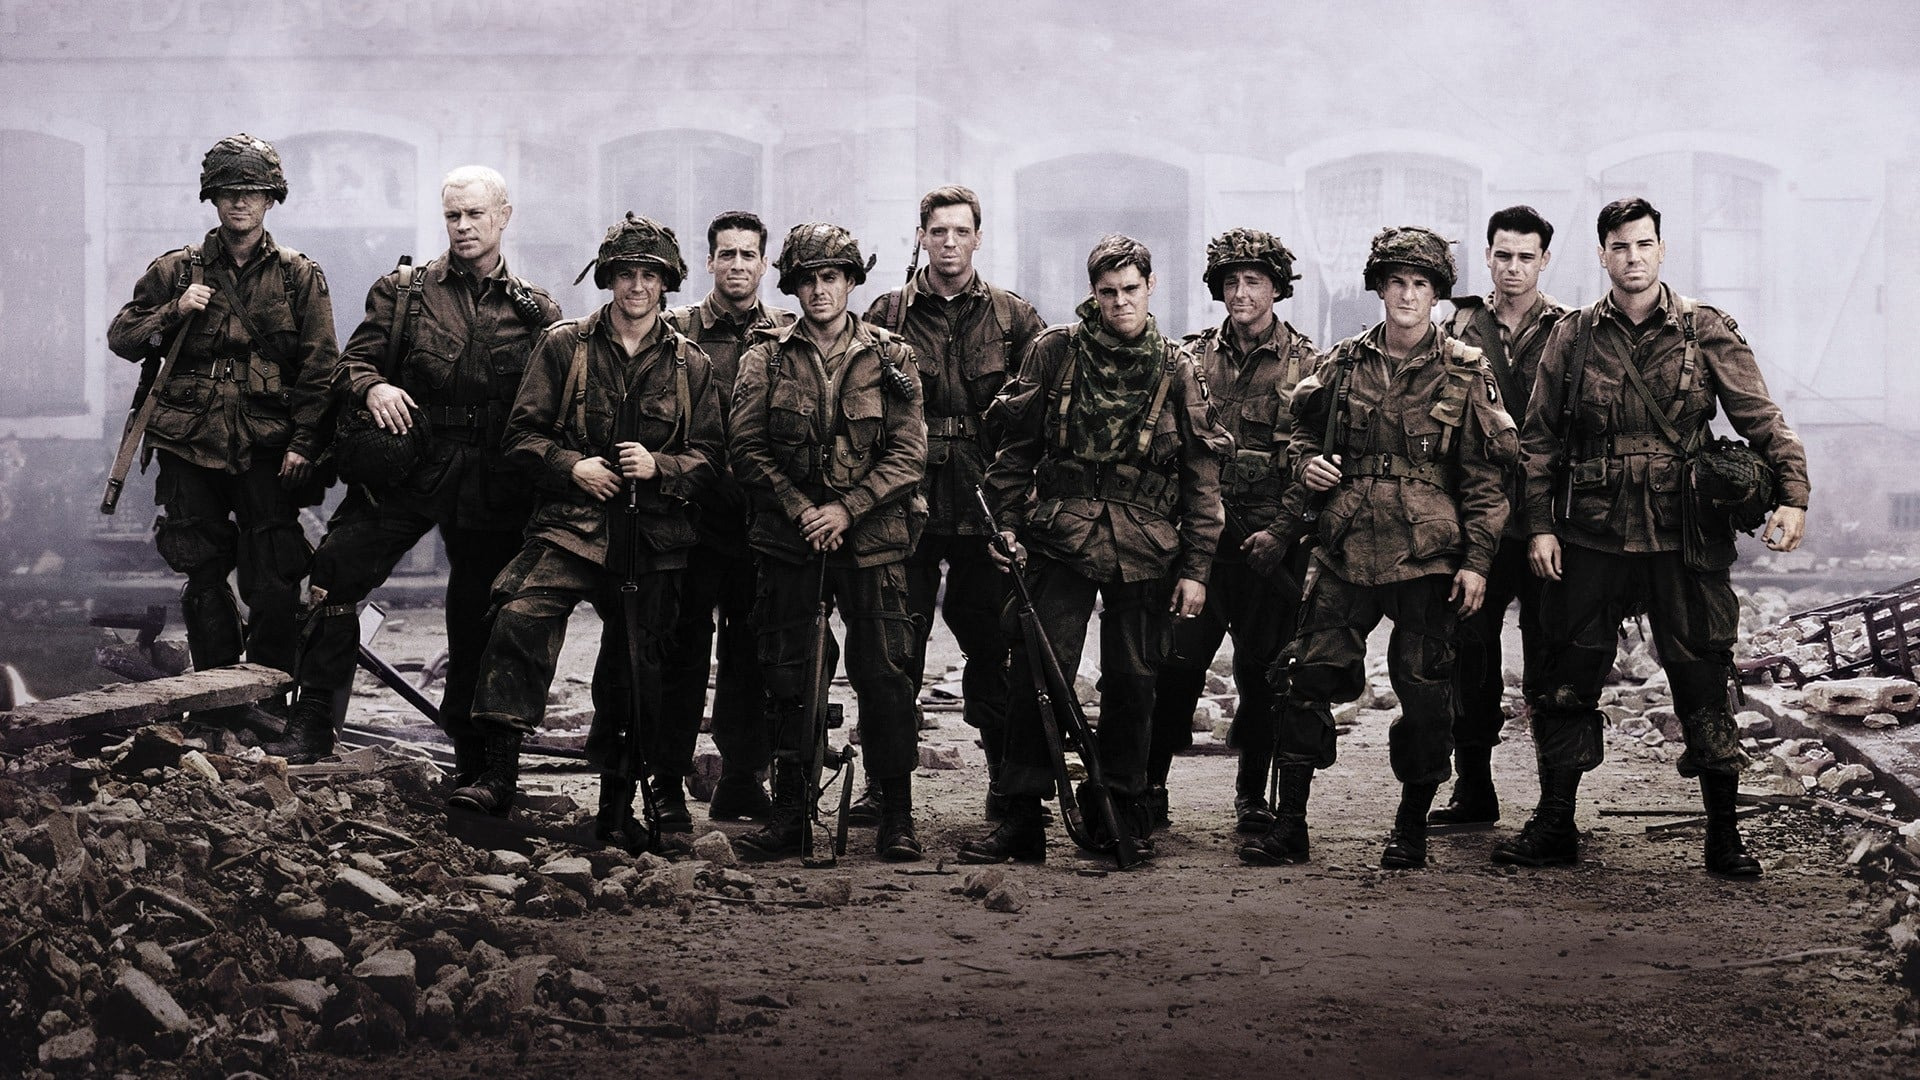 Show Band of Brothers